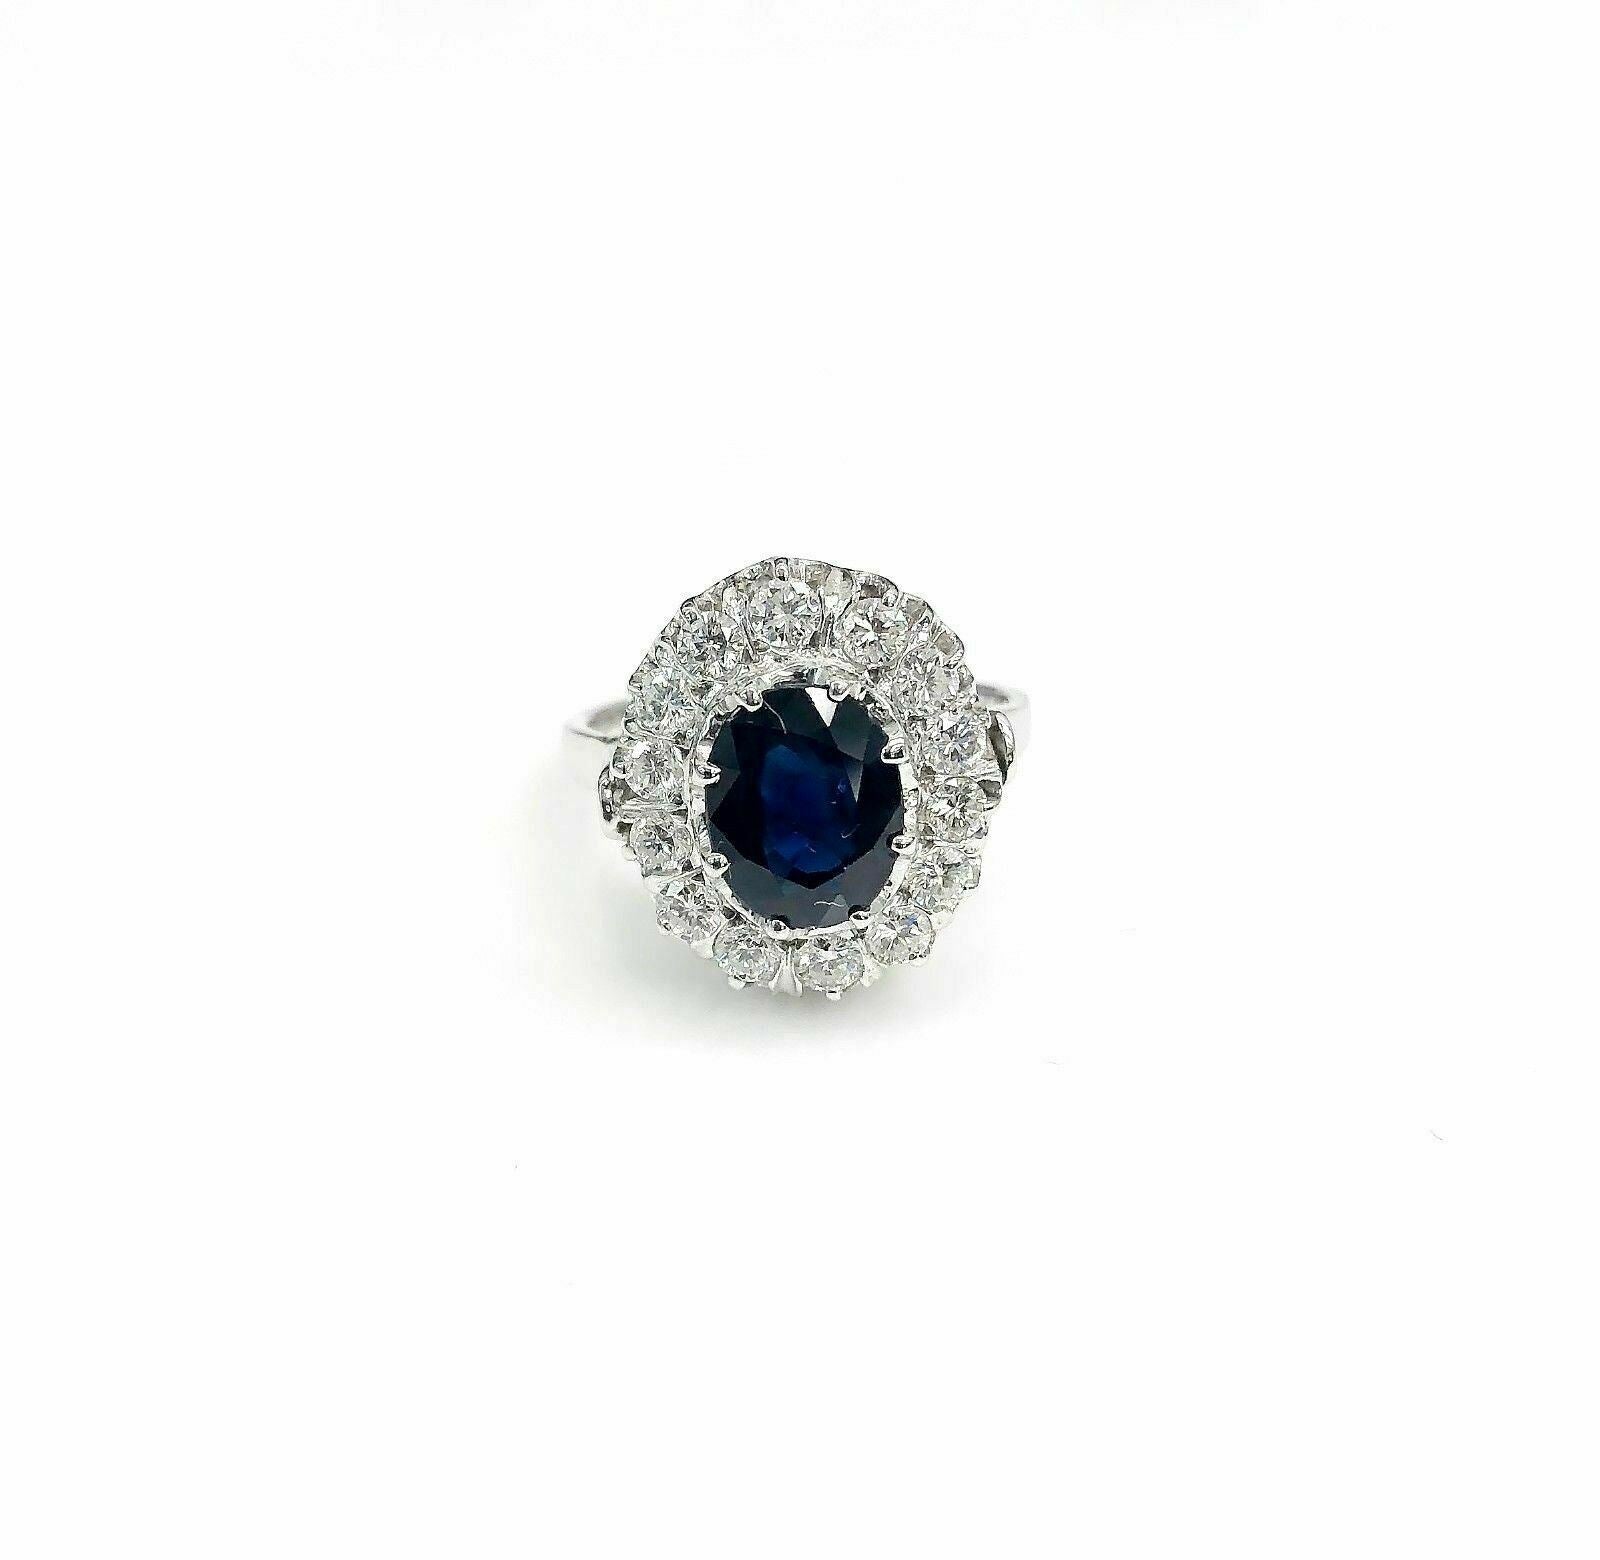 3.65 Carats Vintage Diamond and Sapphire Halo Ring 14K Gold 2.75 Carats Sapphire